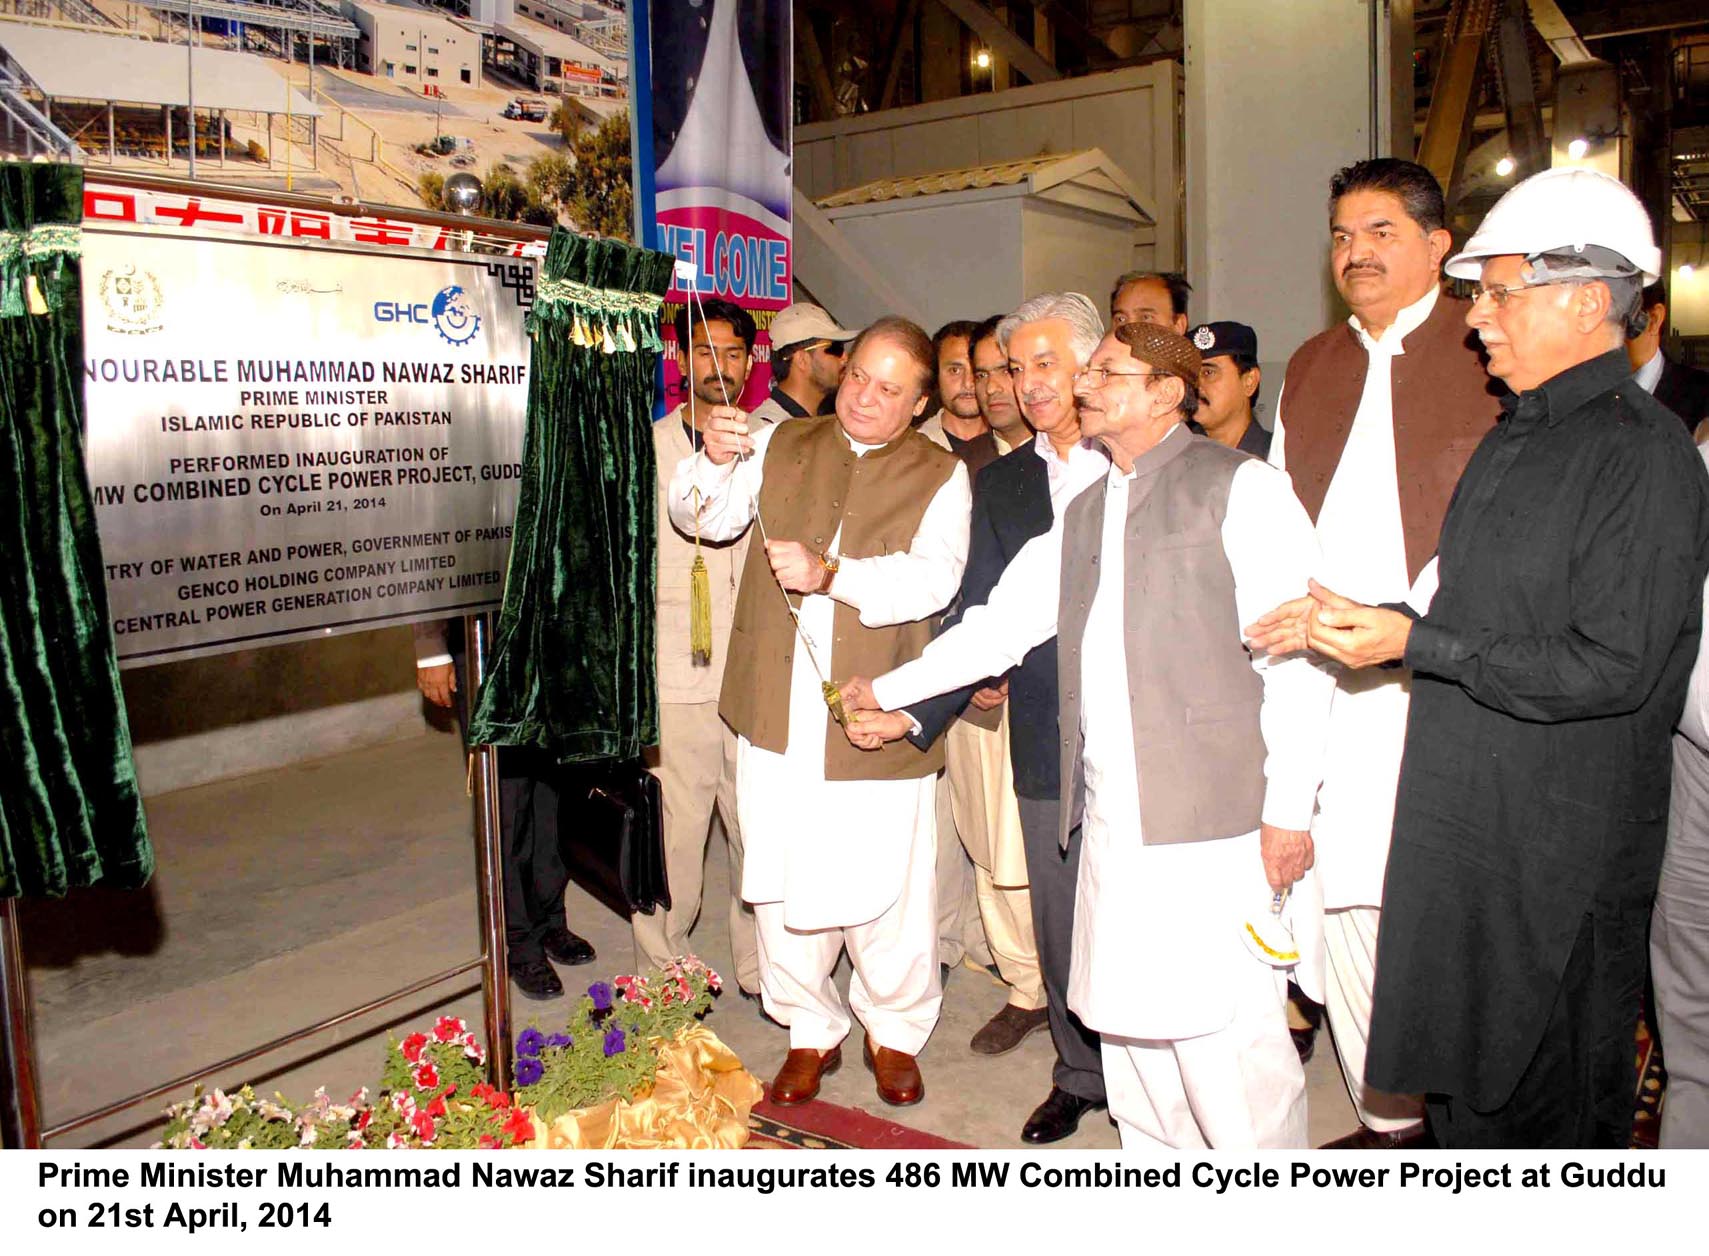 prime minister nawaz sharif along with minister for water and power khawaja asif and the sindh chief minister qaim ali shah unveil the plaque for the 486mw combined cycle power plant at guddu photo pid